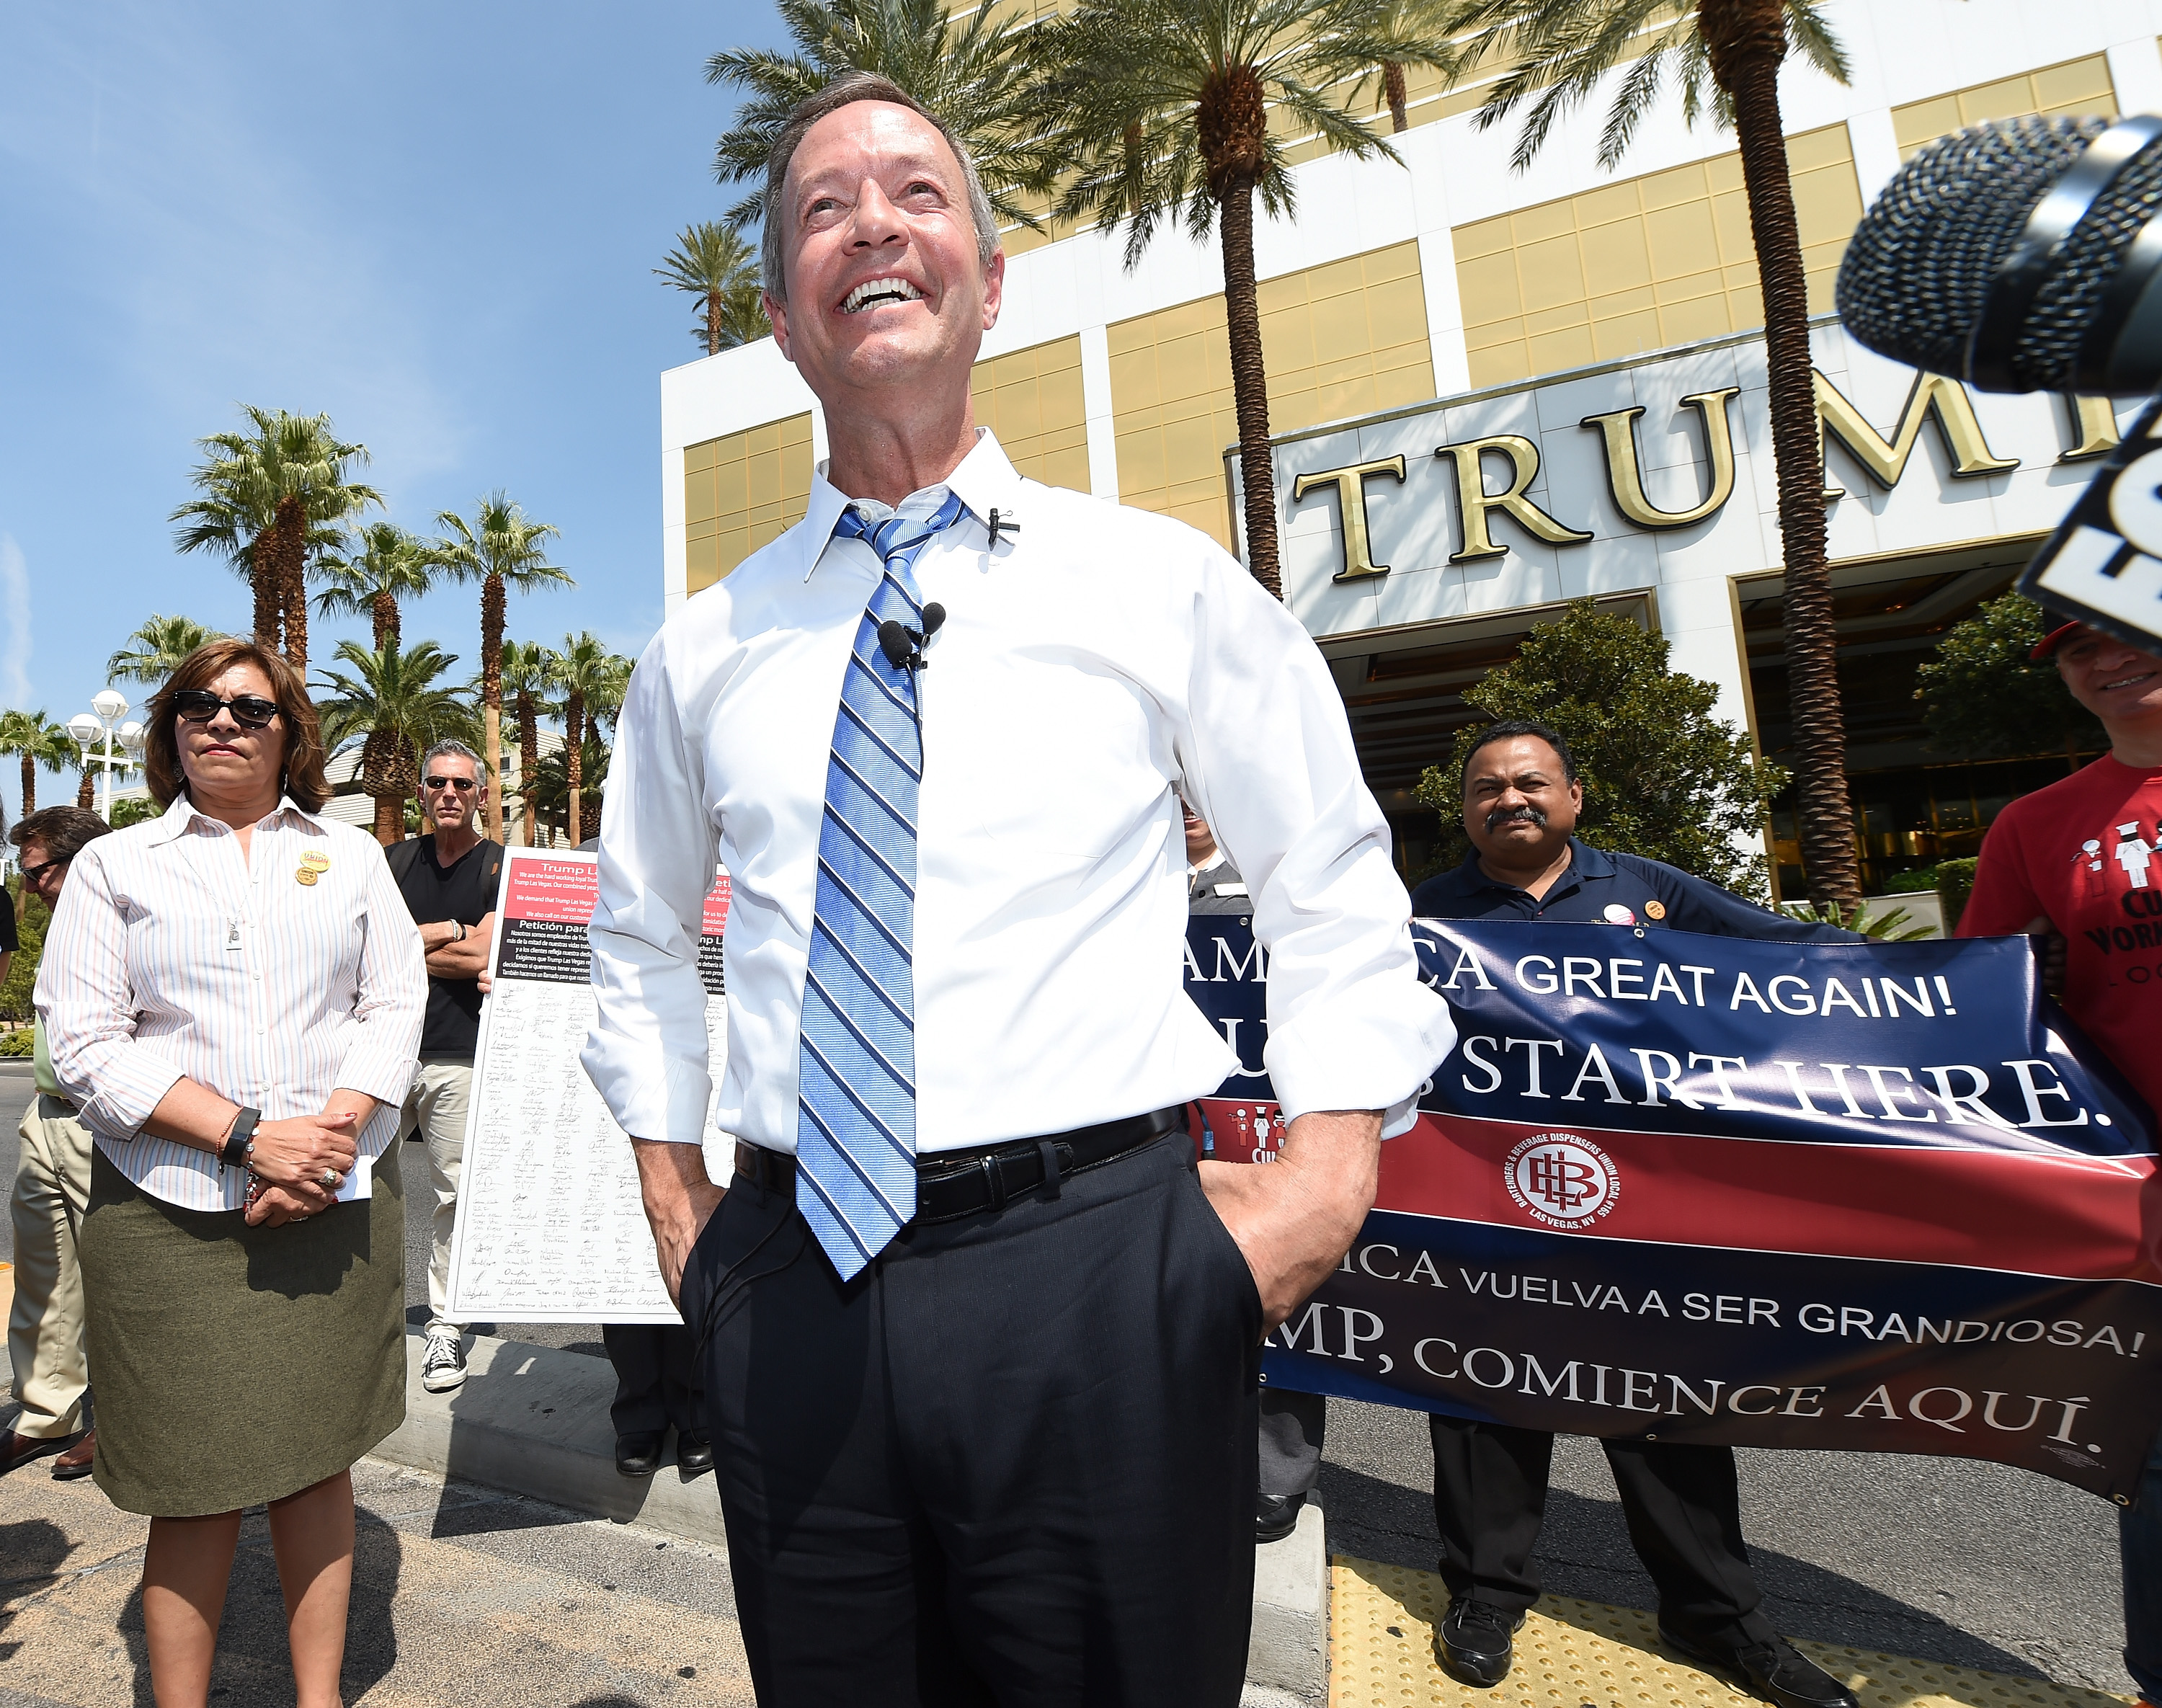 Democratic presidential candidate Martin O'Malley speaks while standing in a median in front of the Trump International Hotel & Tower Las Vegas on August 19, 2015 in Las Vegas, Nevada. (Ethan Miller—Getty Images)